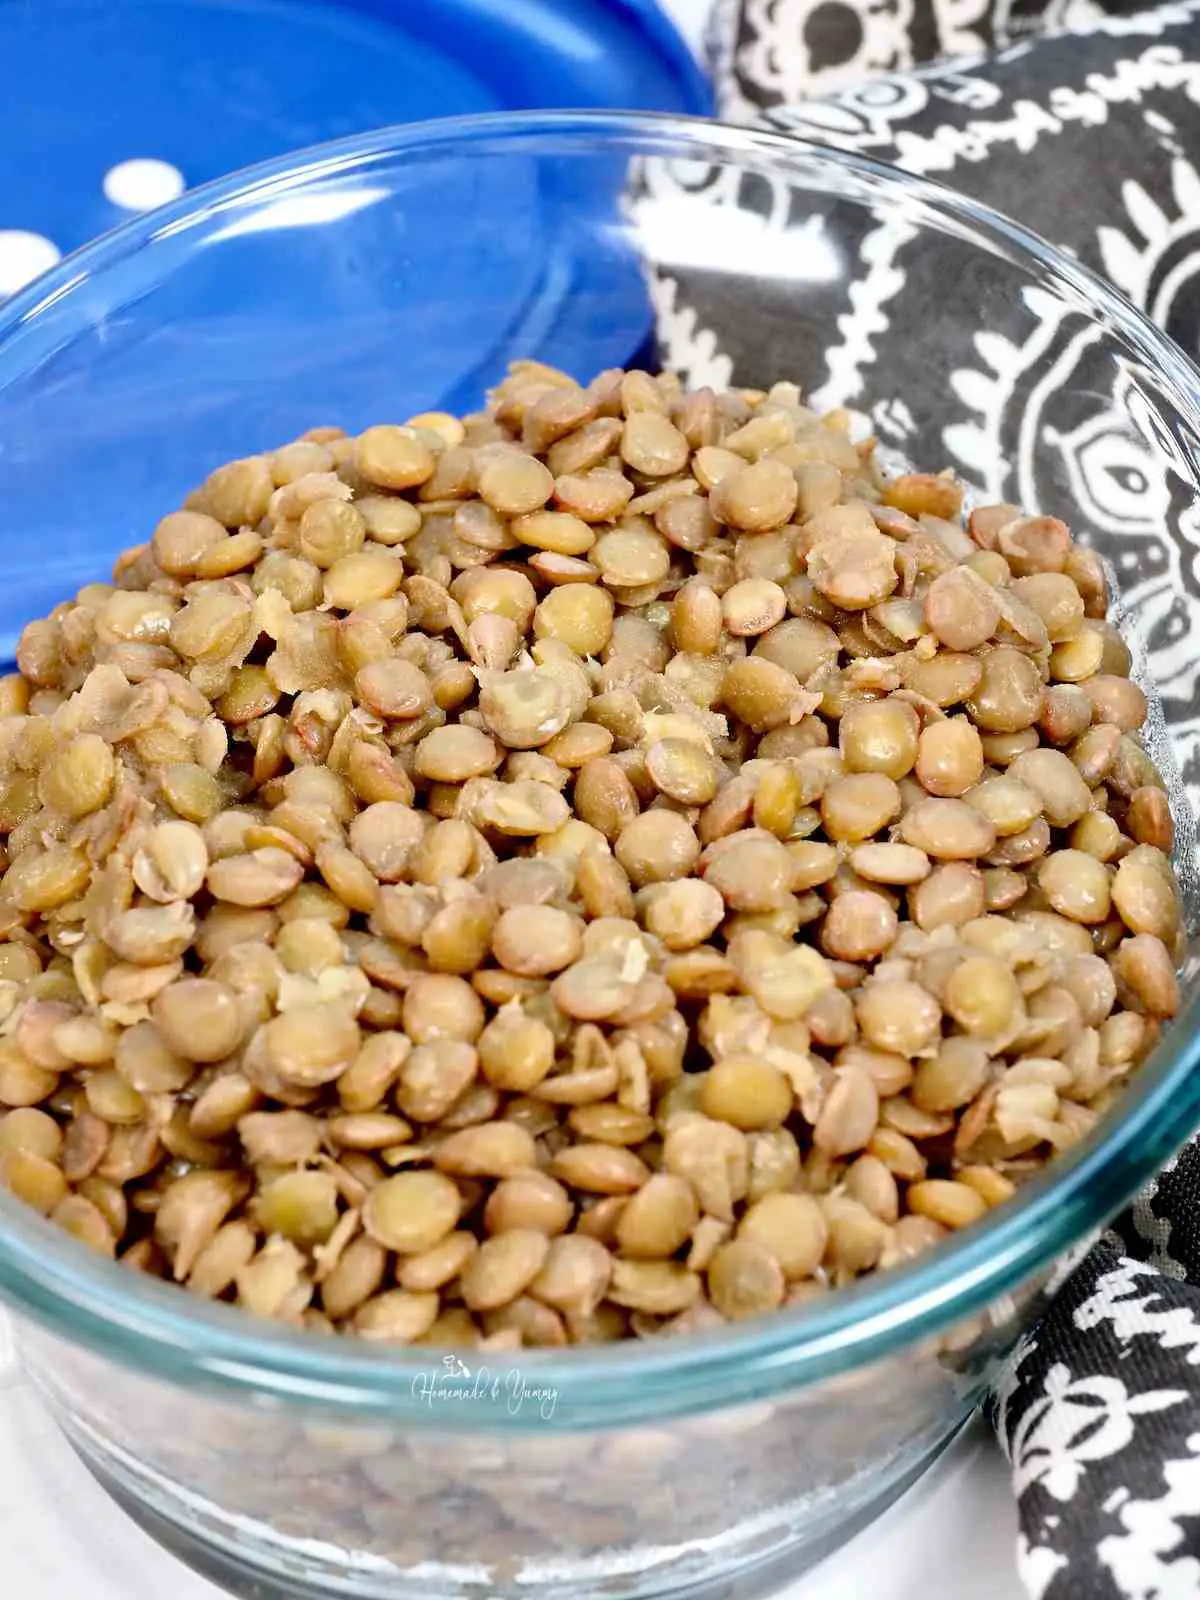 Lentils are marinated and ready to eat